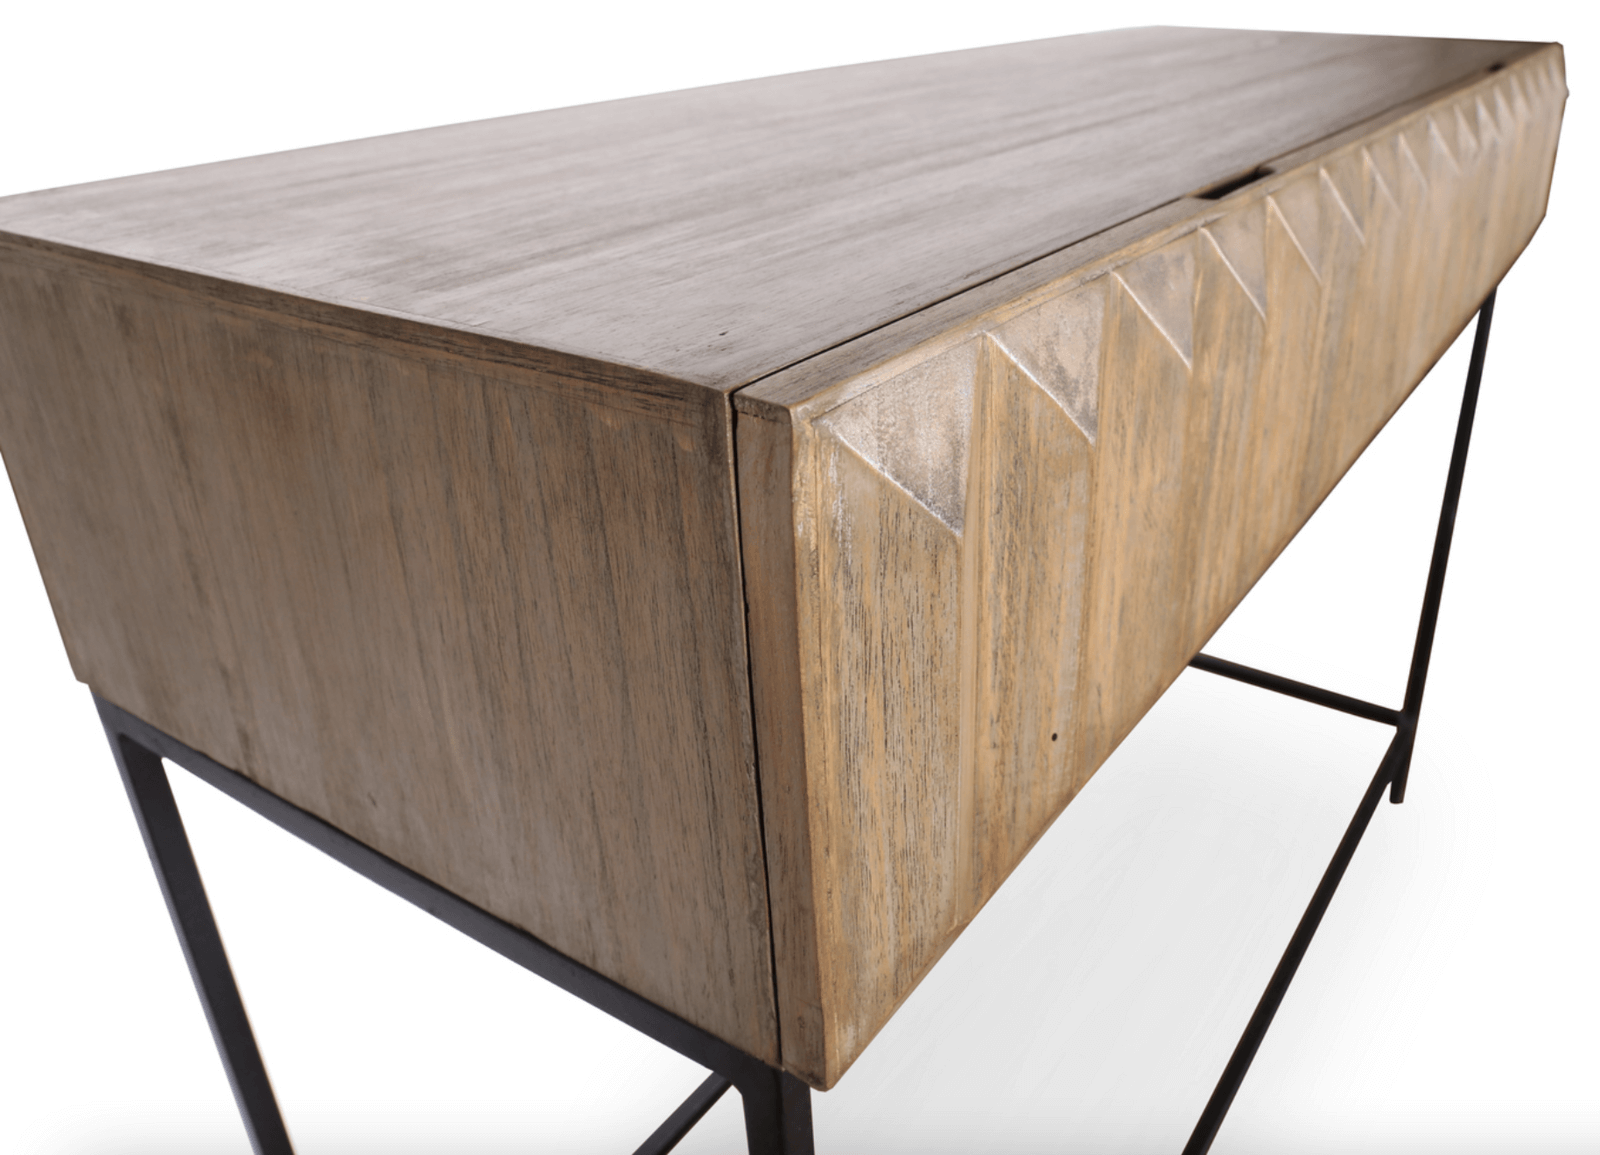 CLEO | NATURAL TIMBER CONSOLE TABLE